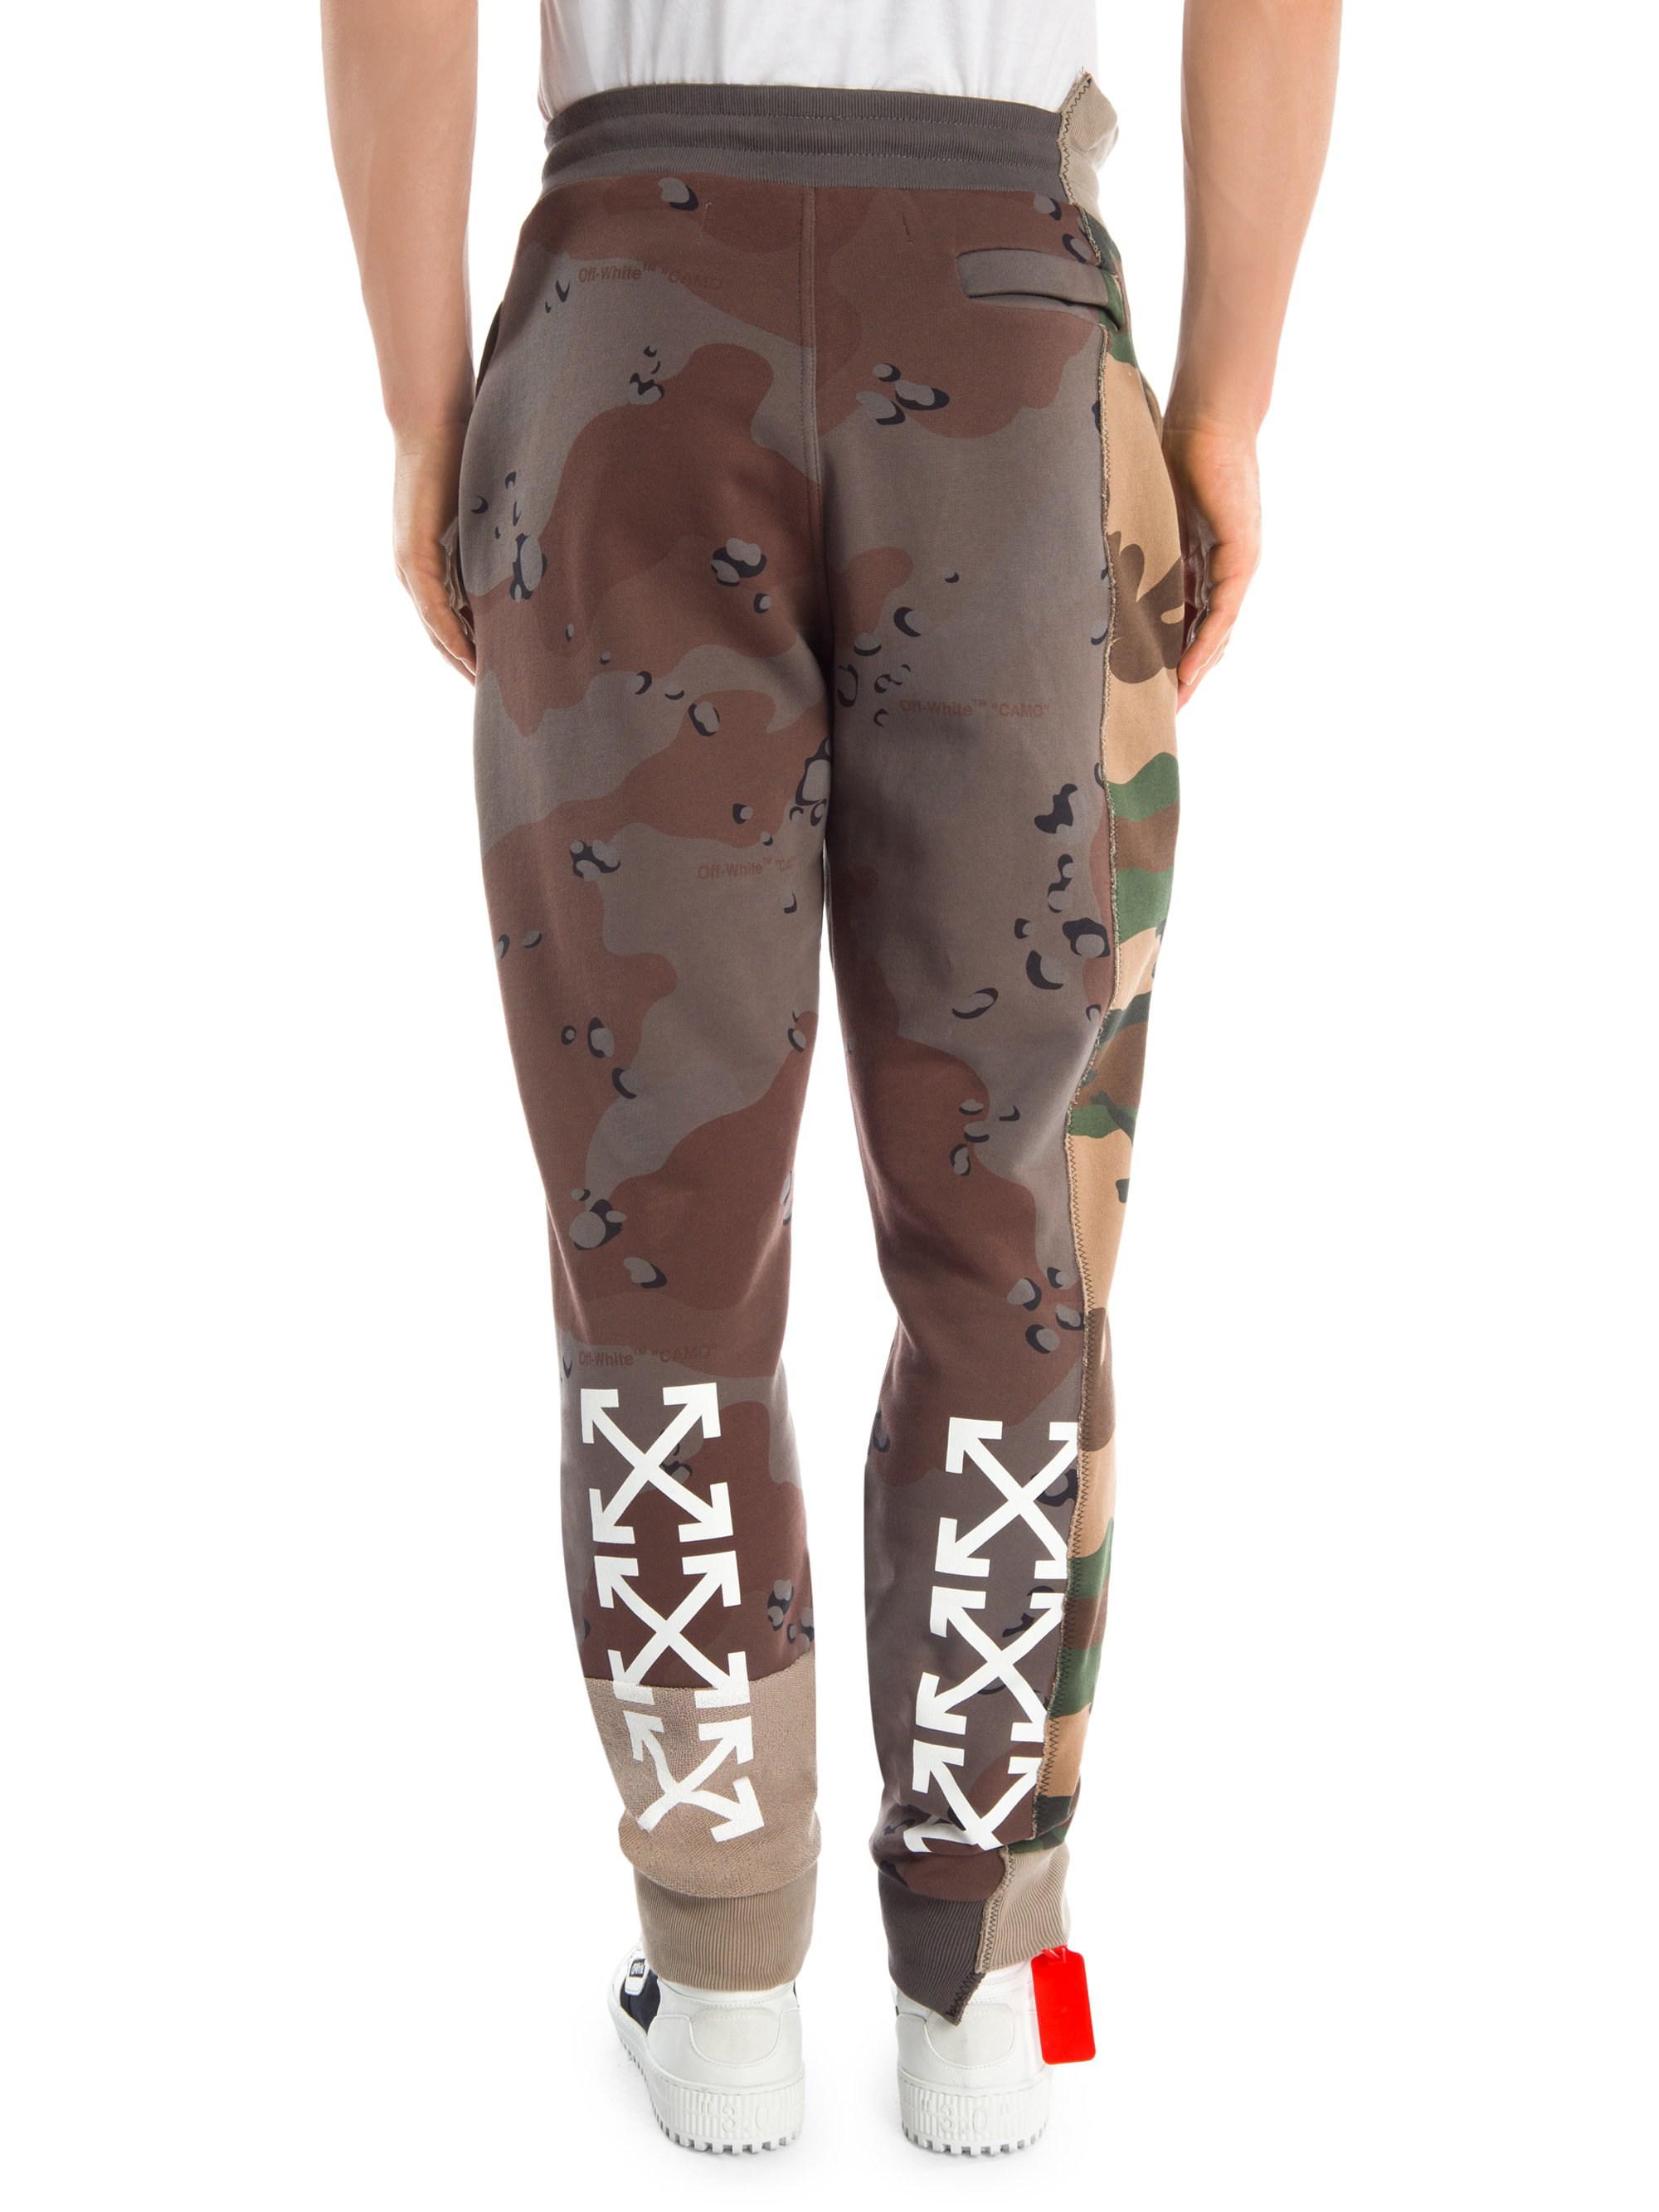 Off-White c/o Virgil Abloh Cotton Reconstructed Camo Sweatpants in Brown  for Men - Lyst